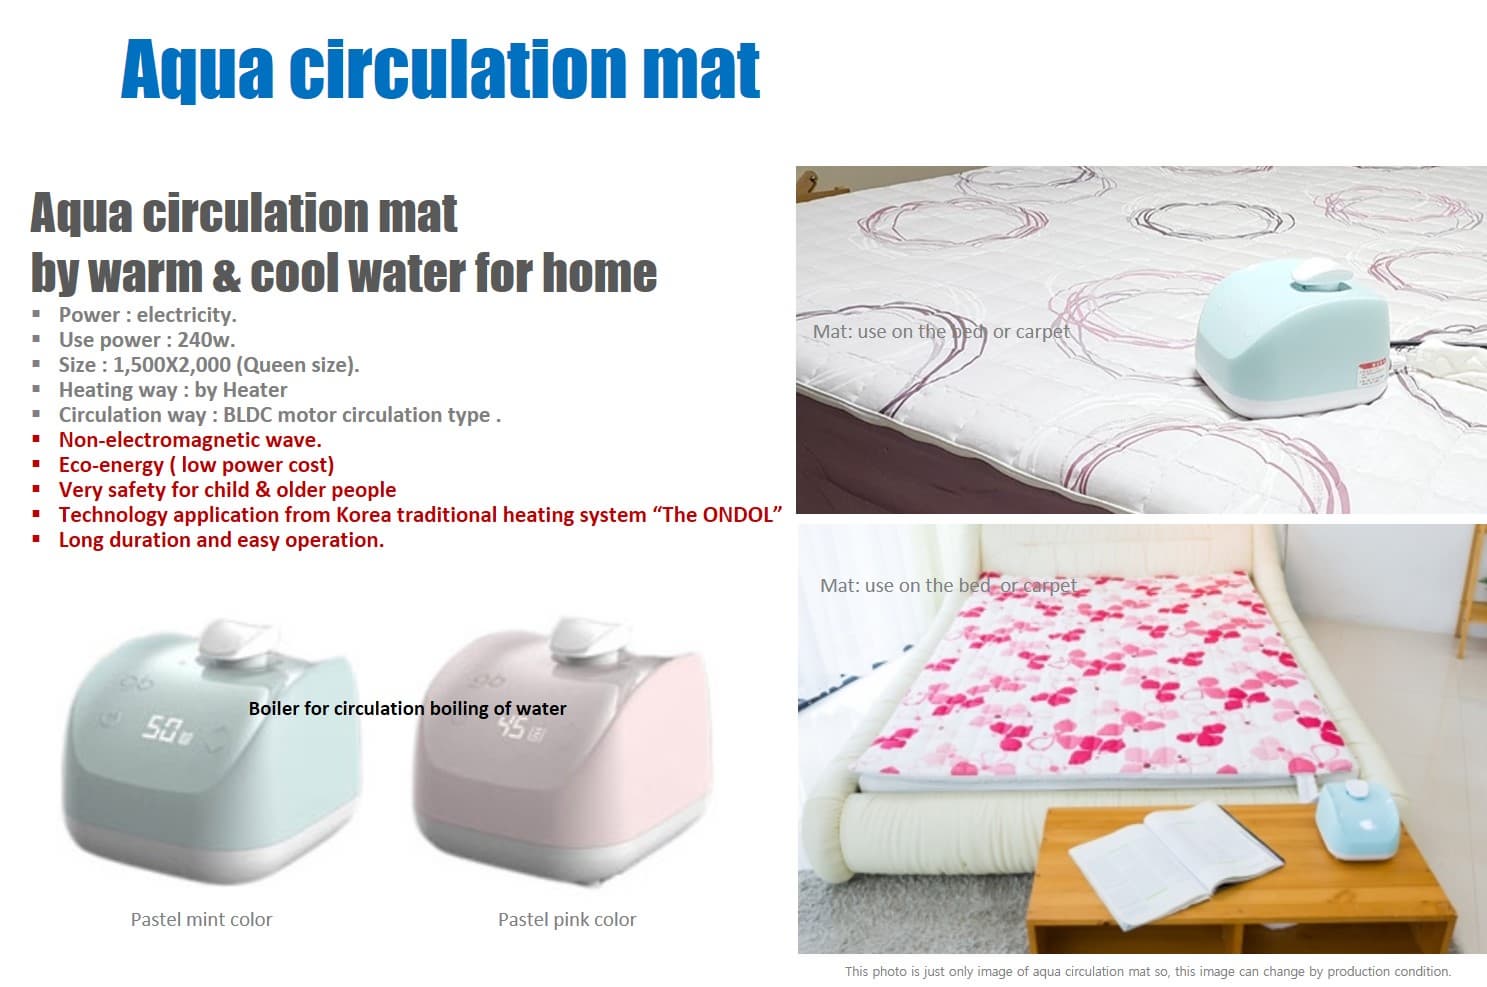 Aqua circulation mat by warm _ cool water for home